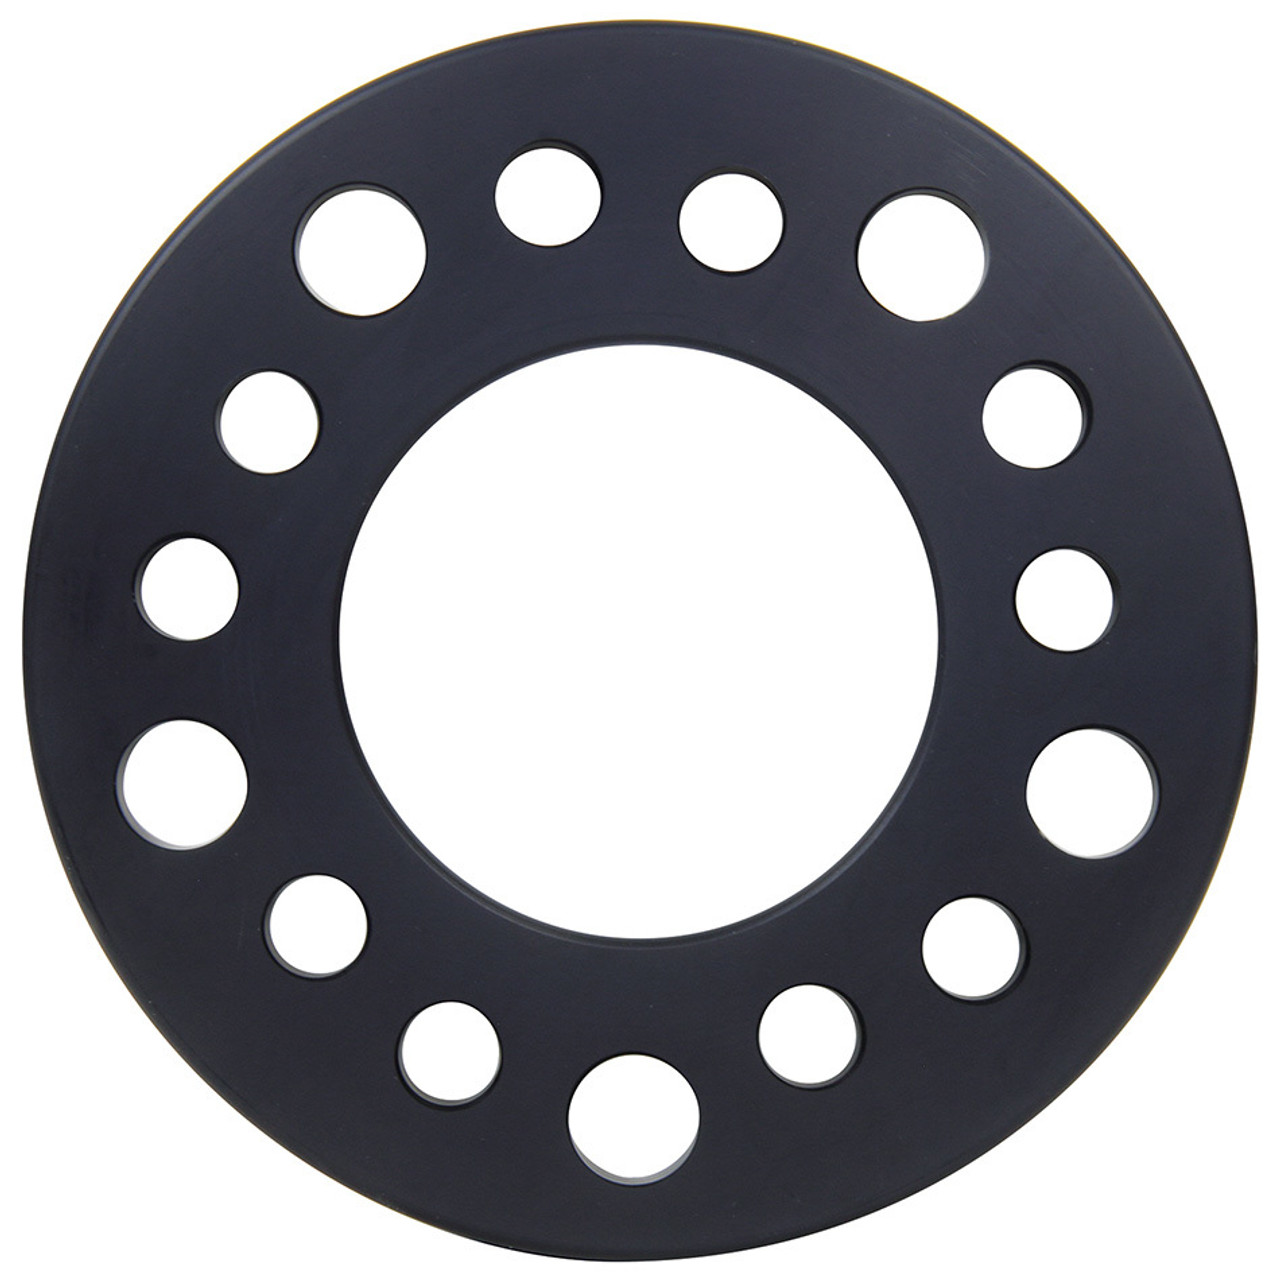 Table Foiler Replacement Wheel For 1/4 Foil